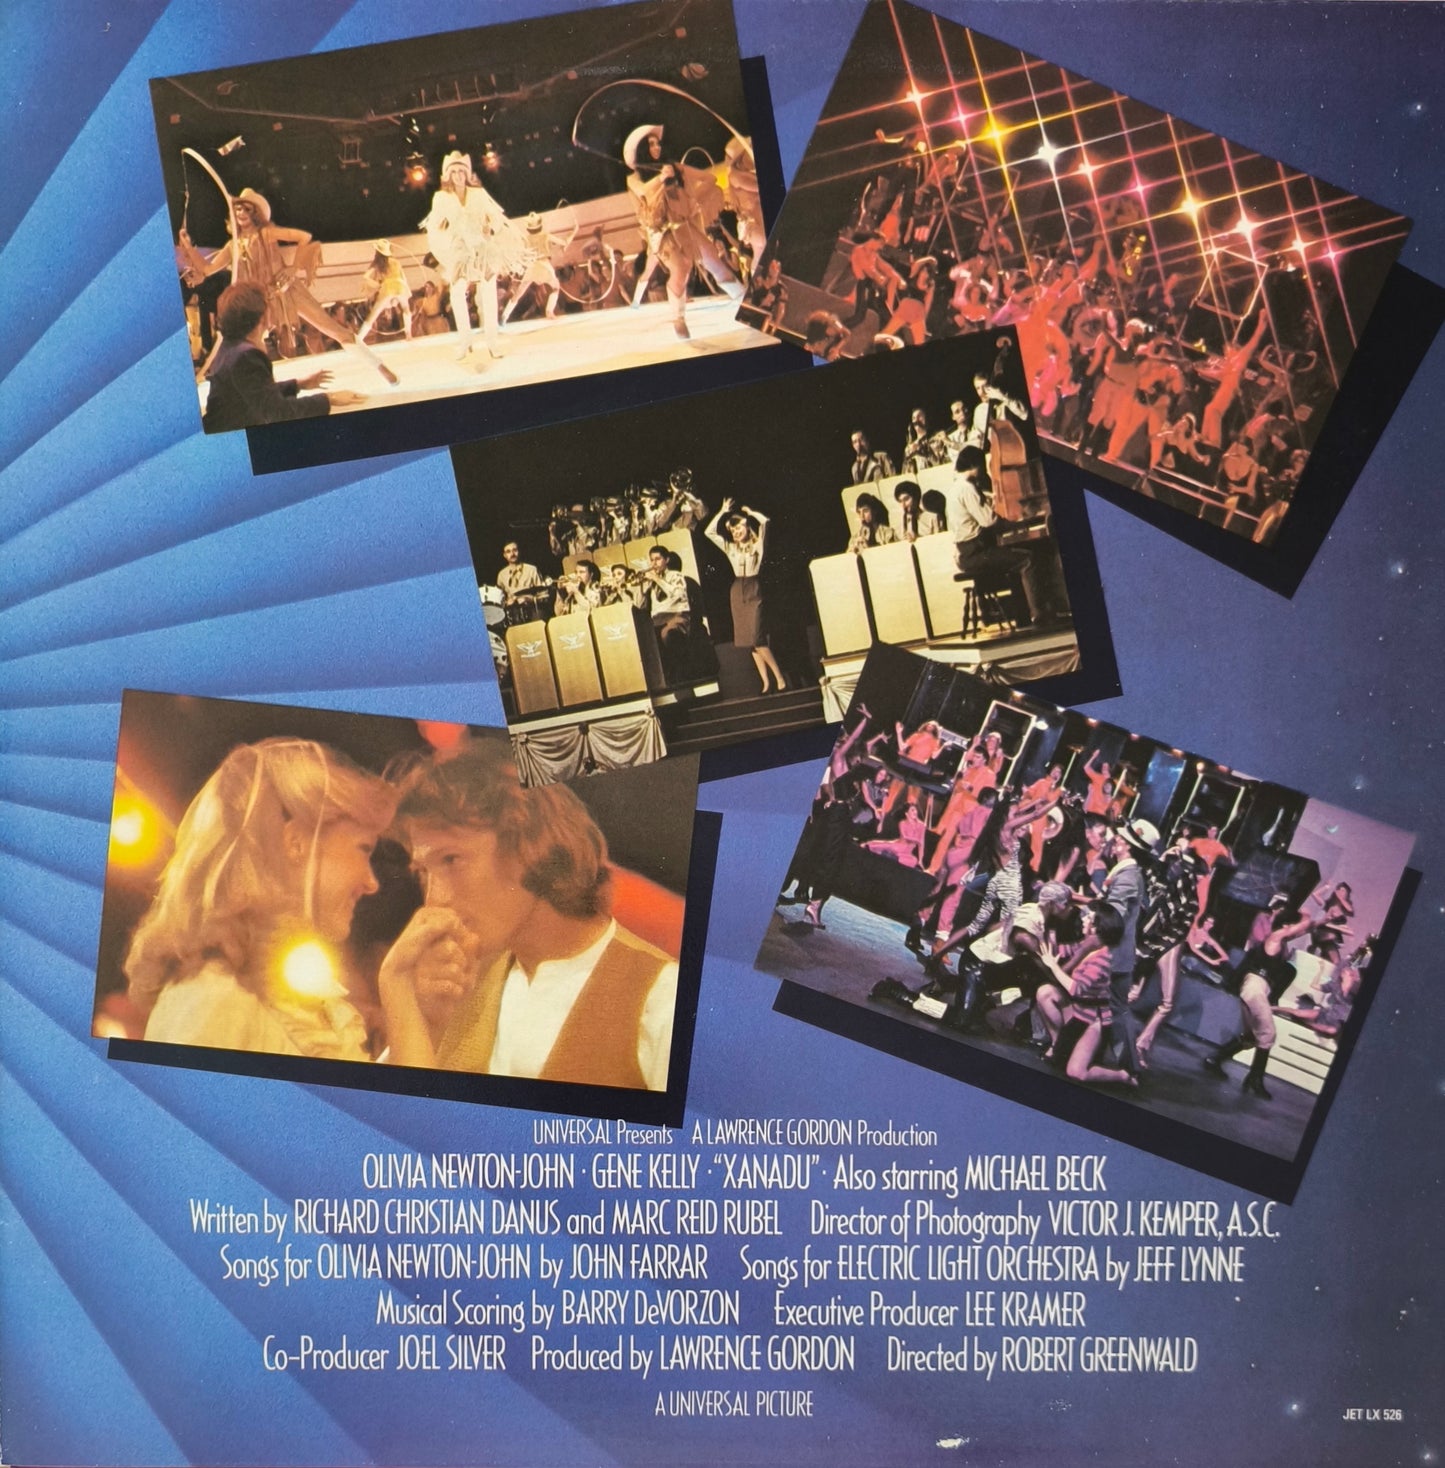 ELECTRIC LIGHT ORCHESTRA / OLIVIA NEWTON JOHN - Xanadu (From The Original Motion Picture Soundtrack)